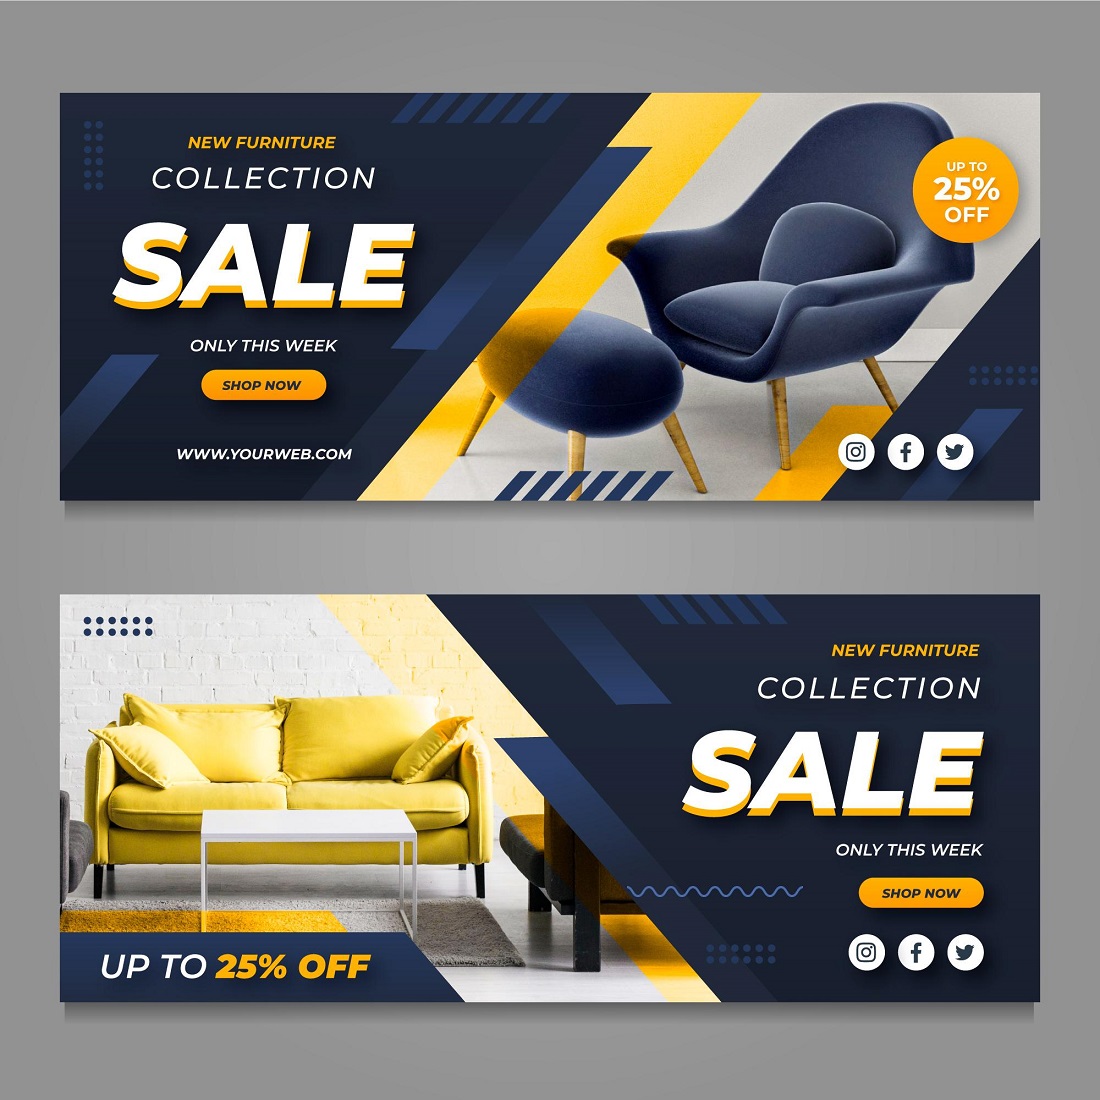 Furniture sale banners preview image.